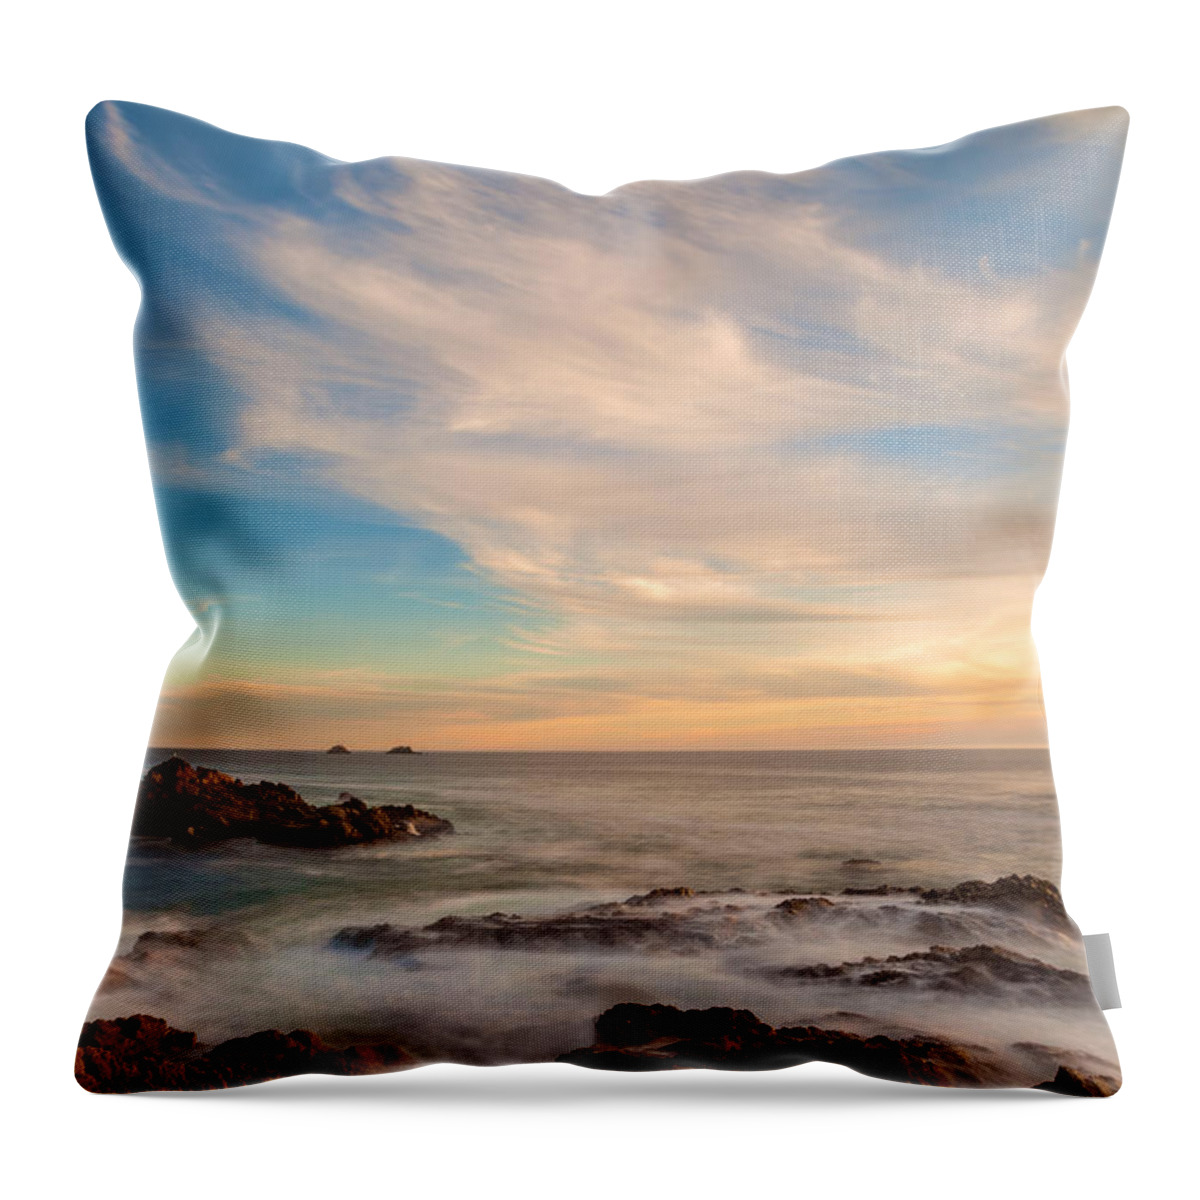 American Landscapes Throw Pillow featuring the photograph Blistering by Jonathan Nguyen